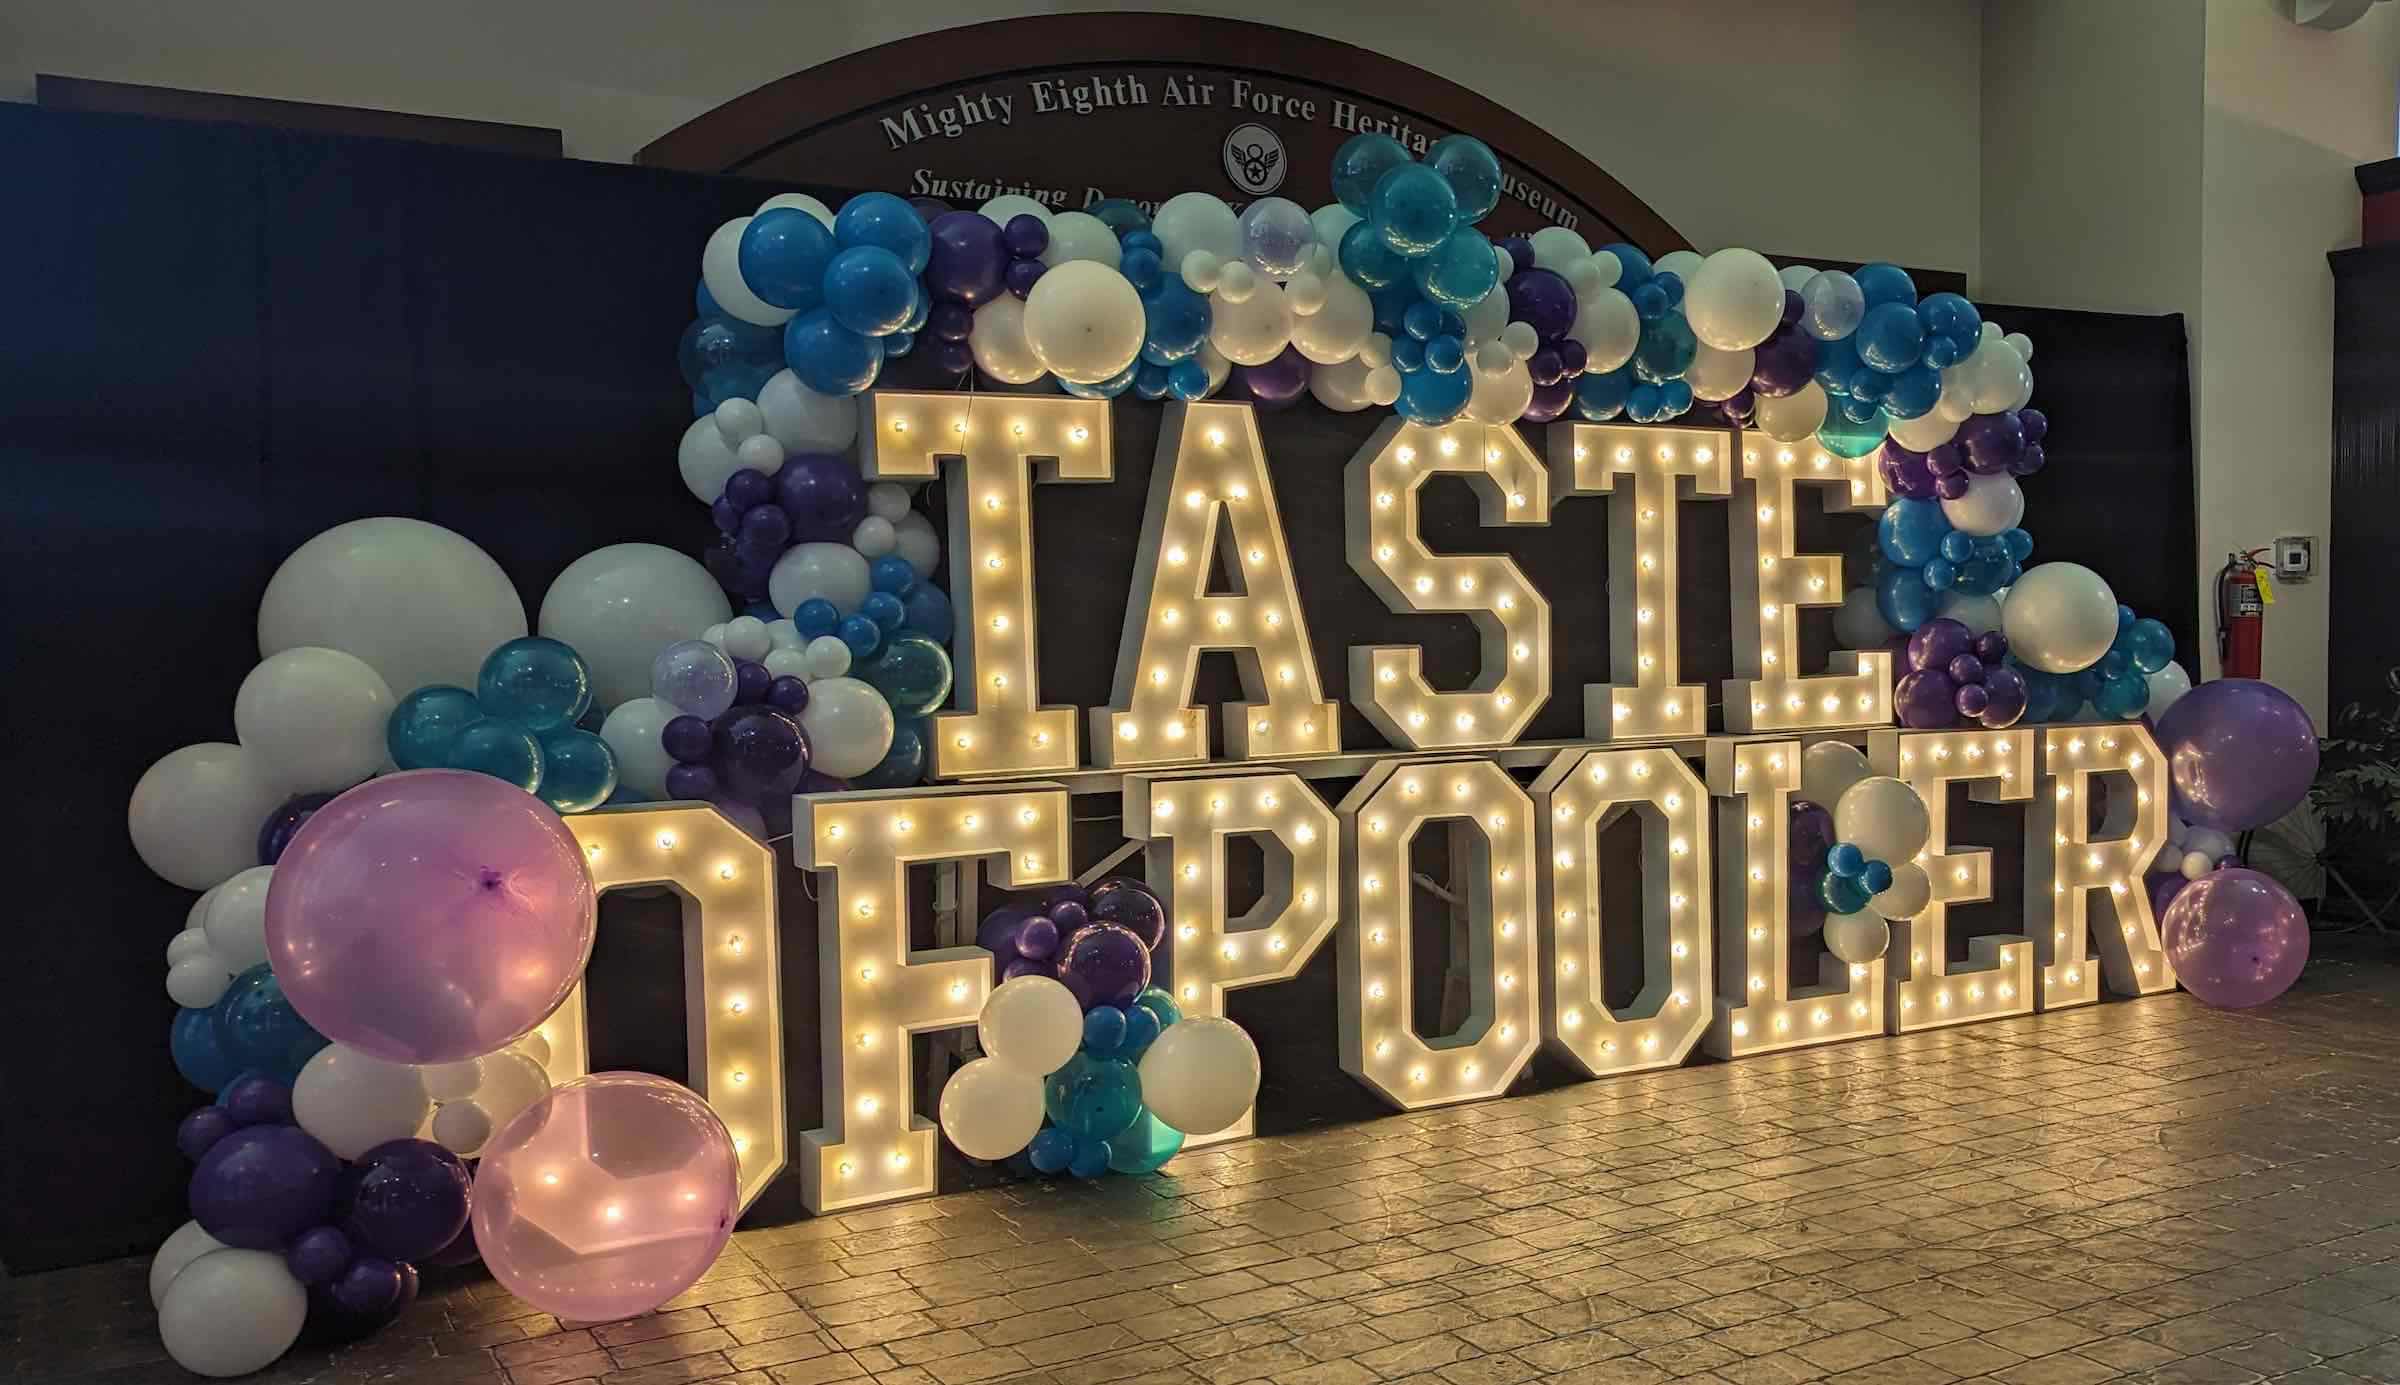 A light display that says A Taste of Pooler with a balloon display over it.